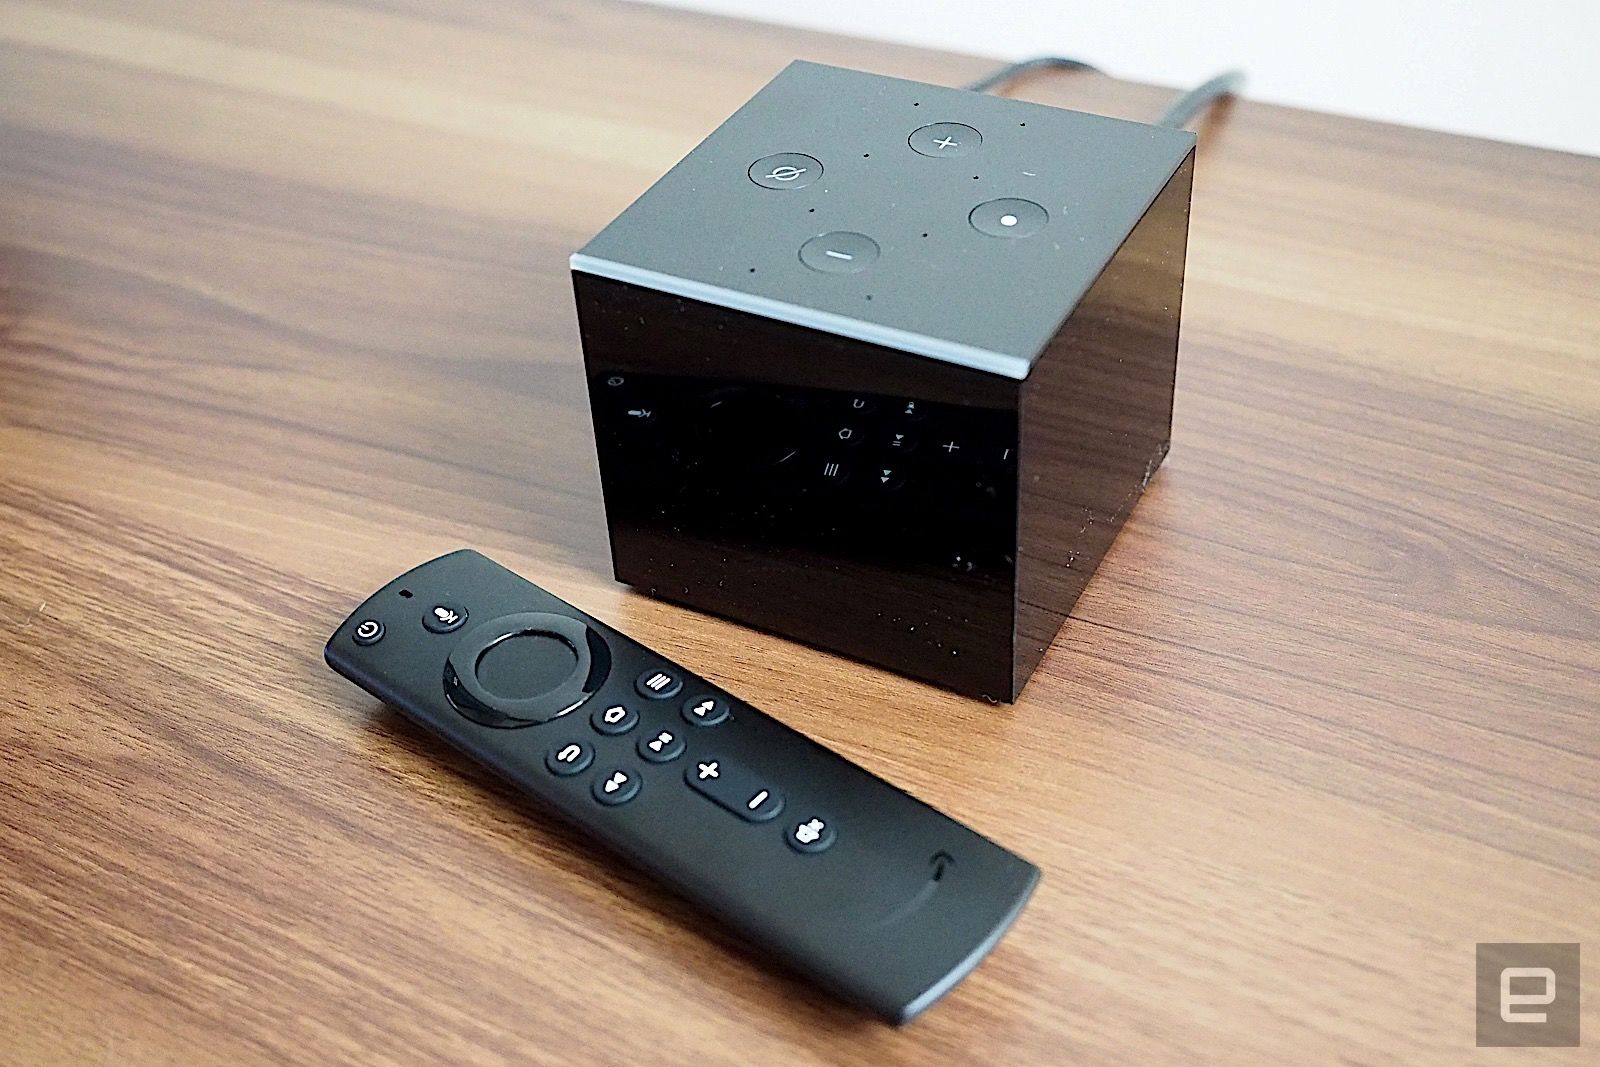 Amazon’s Fireplace TV Dice is on sale for $100 correct now